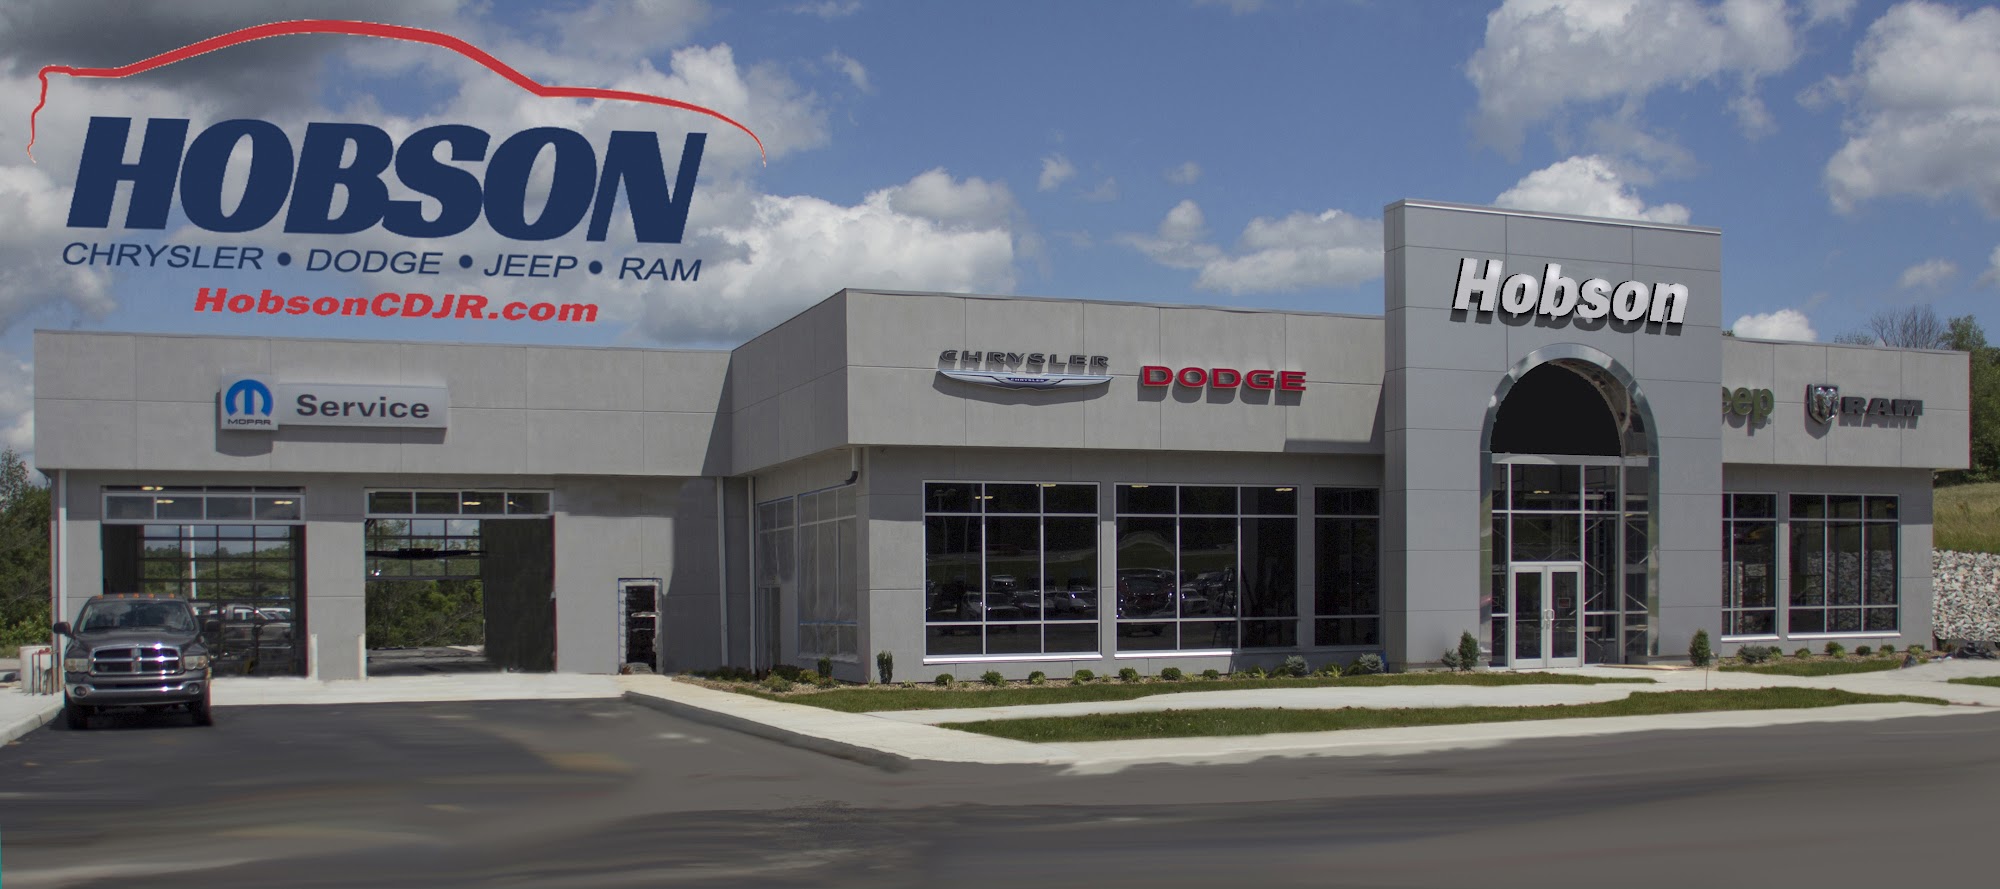 Chrysler Dodge Jeep Ram Service and Parts